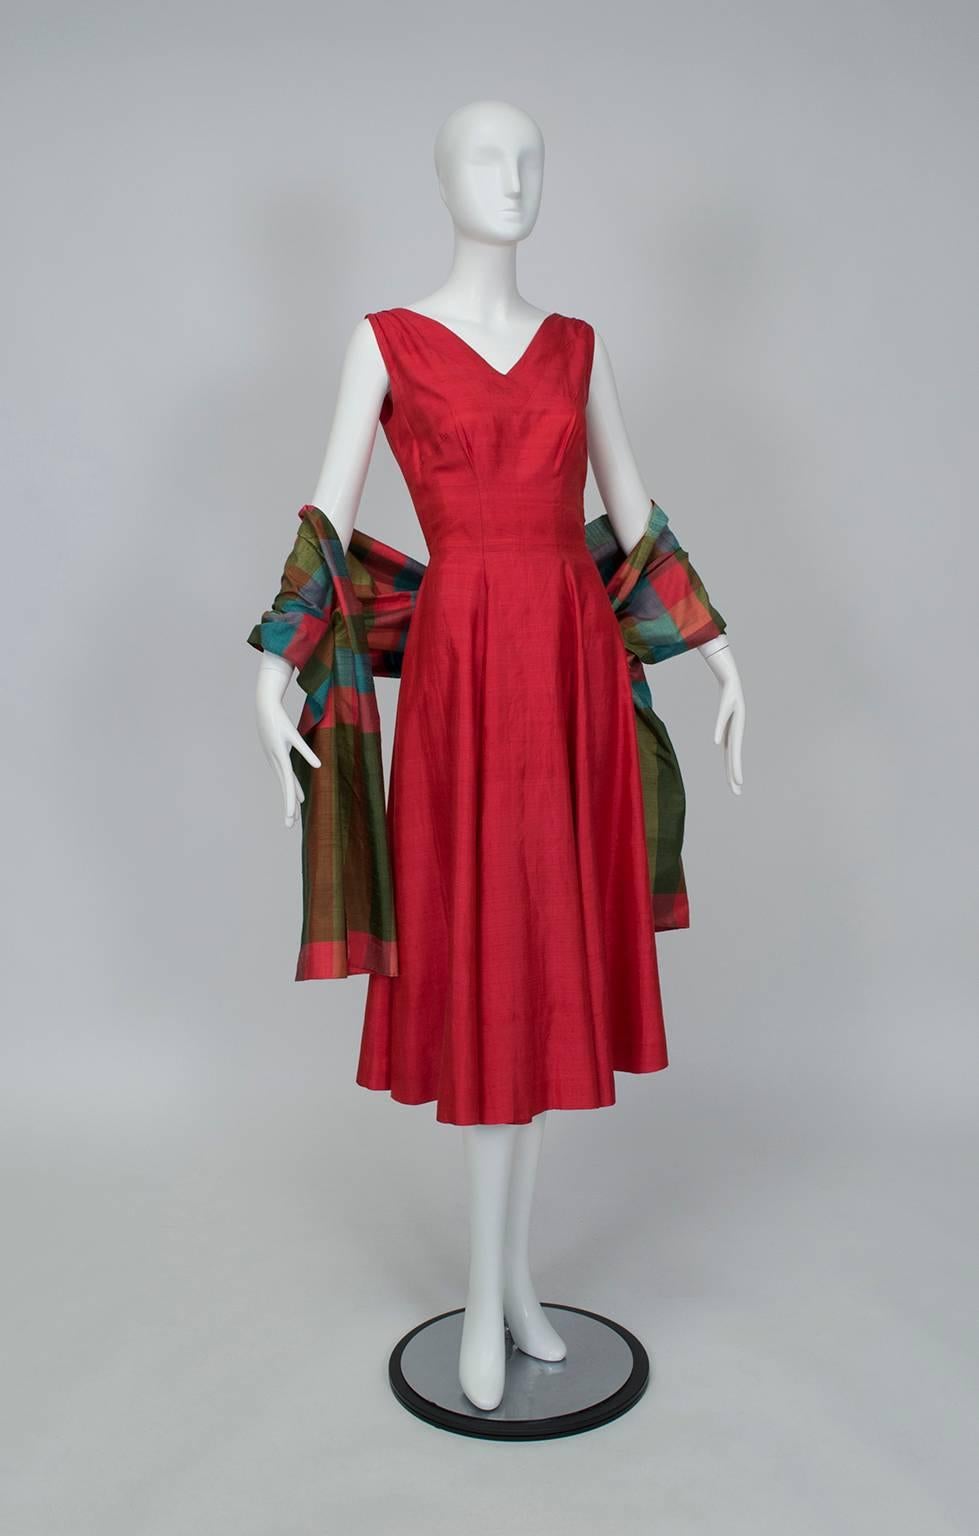 From the estate of a WWII nurse who traveled Asia (alone!) during her leave, this exceptional dress was custom made in Bangkok in the early 1950s. Though it appears straightforward, the dress features subtle details like alternating textile grains